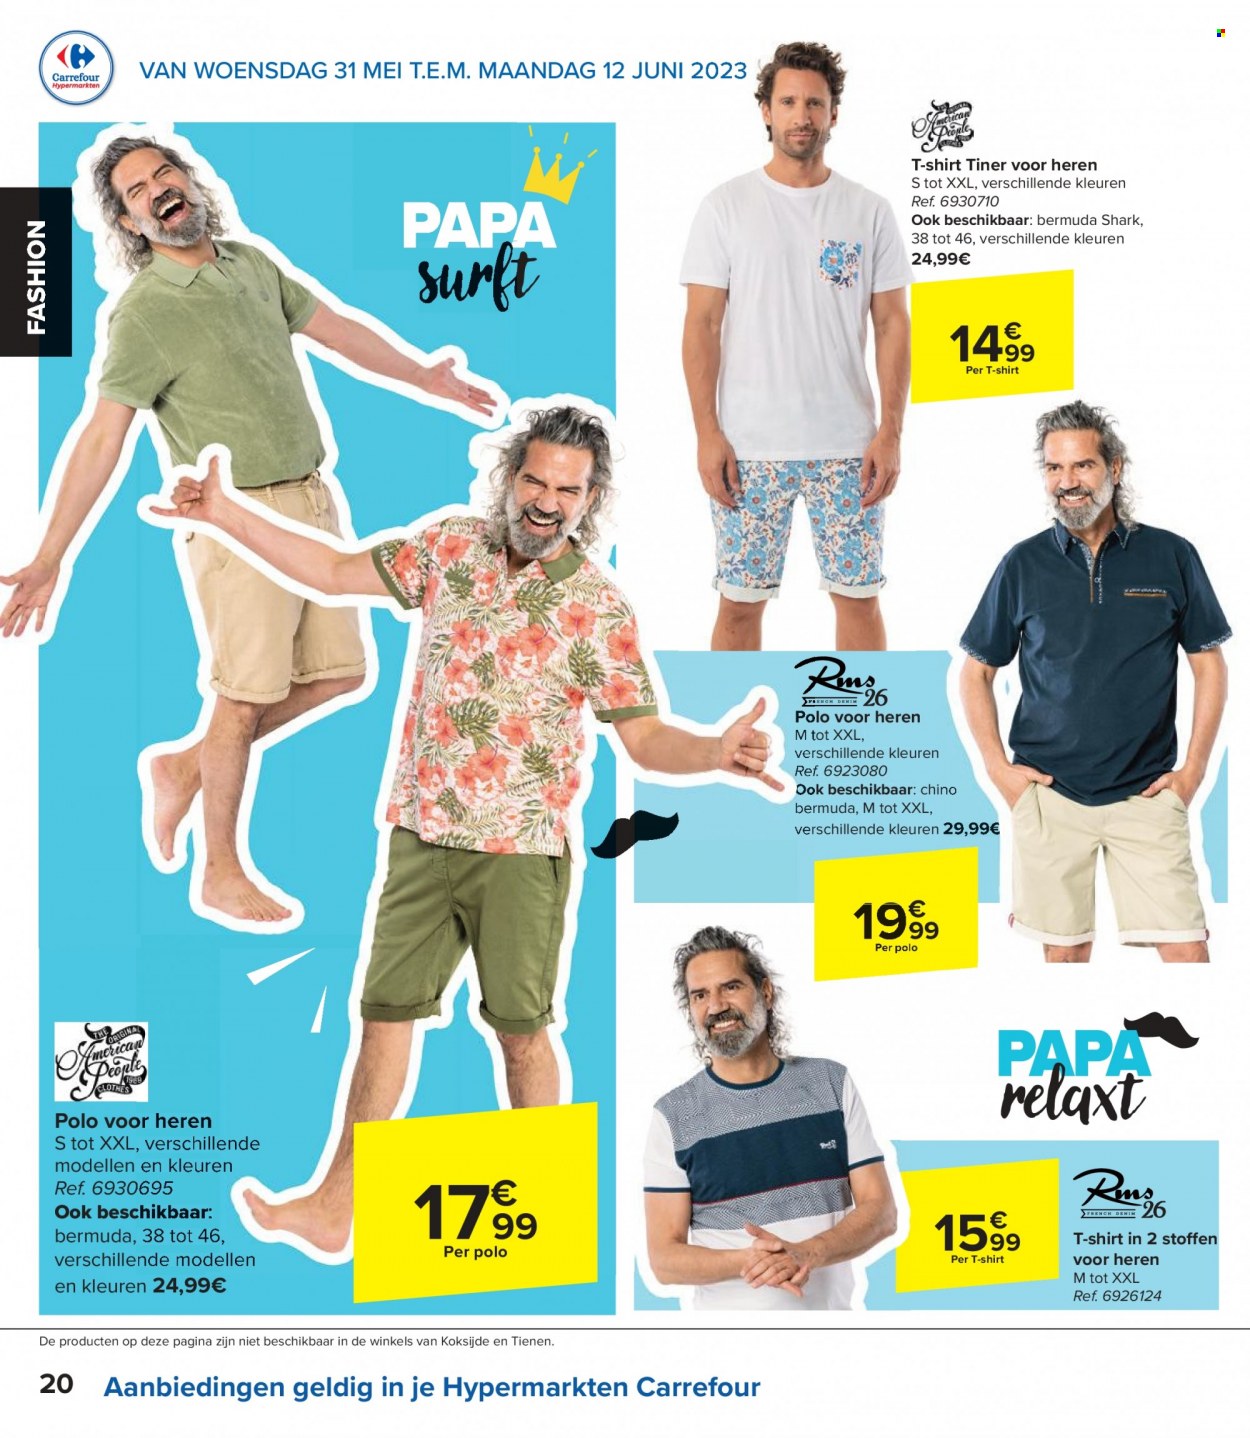 Catalogue Carrefour hypermarkt - 31.5.2023 - 12.6.2023. Page 20.